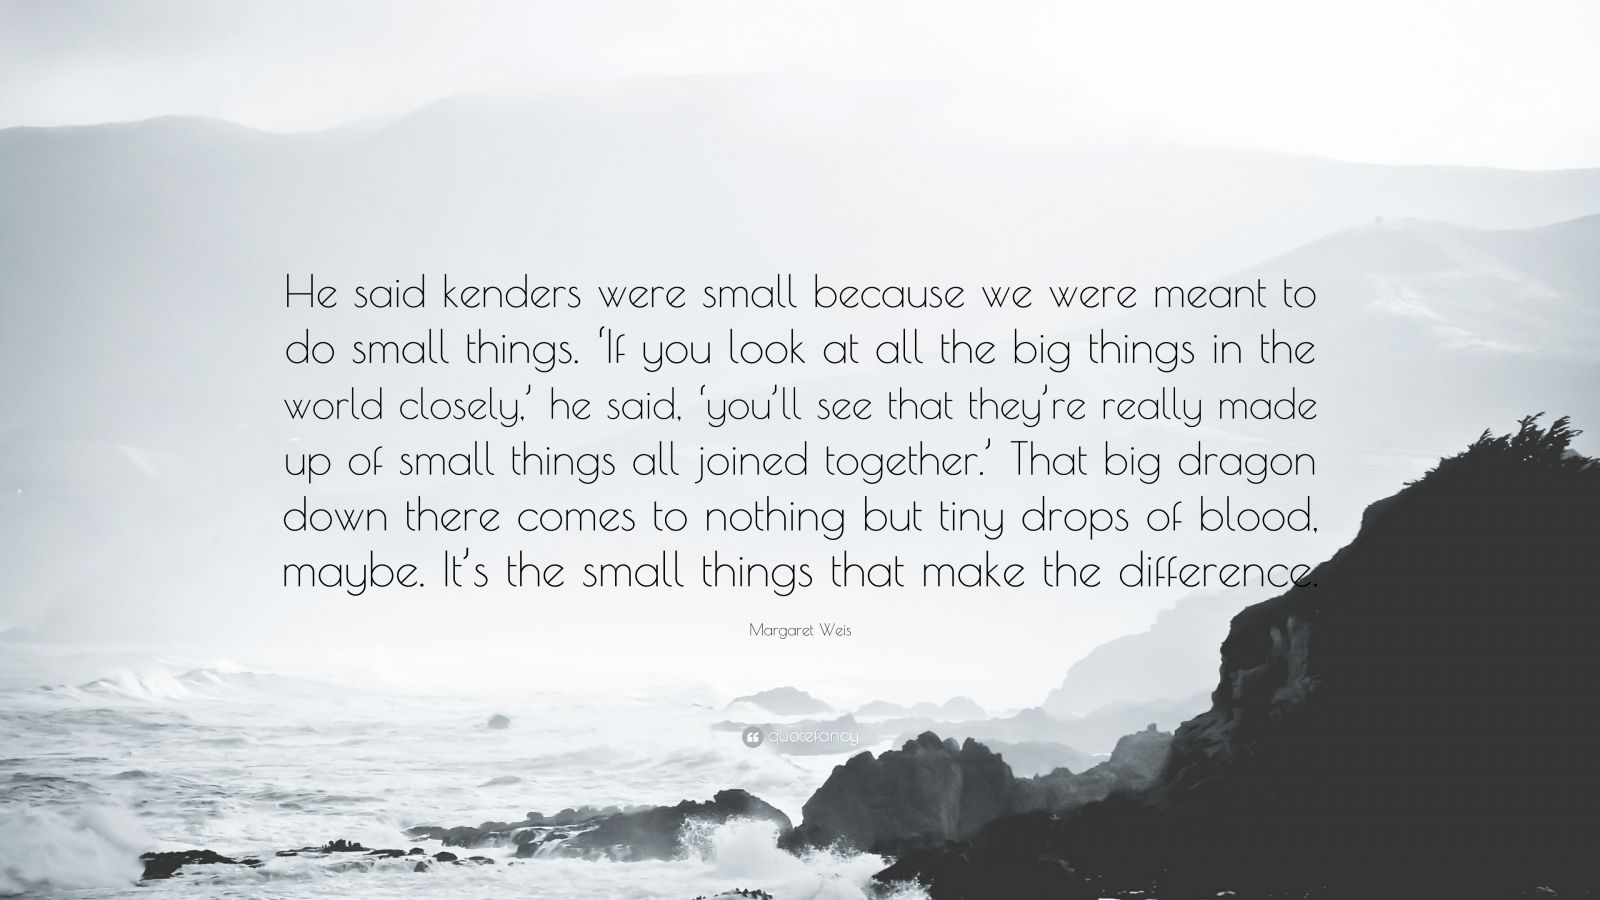 Margaret Weis Quote: “He said kenders were small because we were meant to  do small things. 'If you look at all the big things in the world clo”